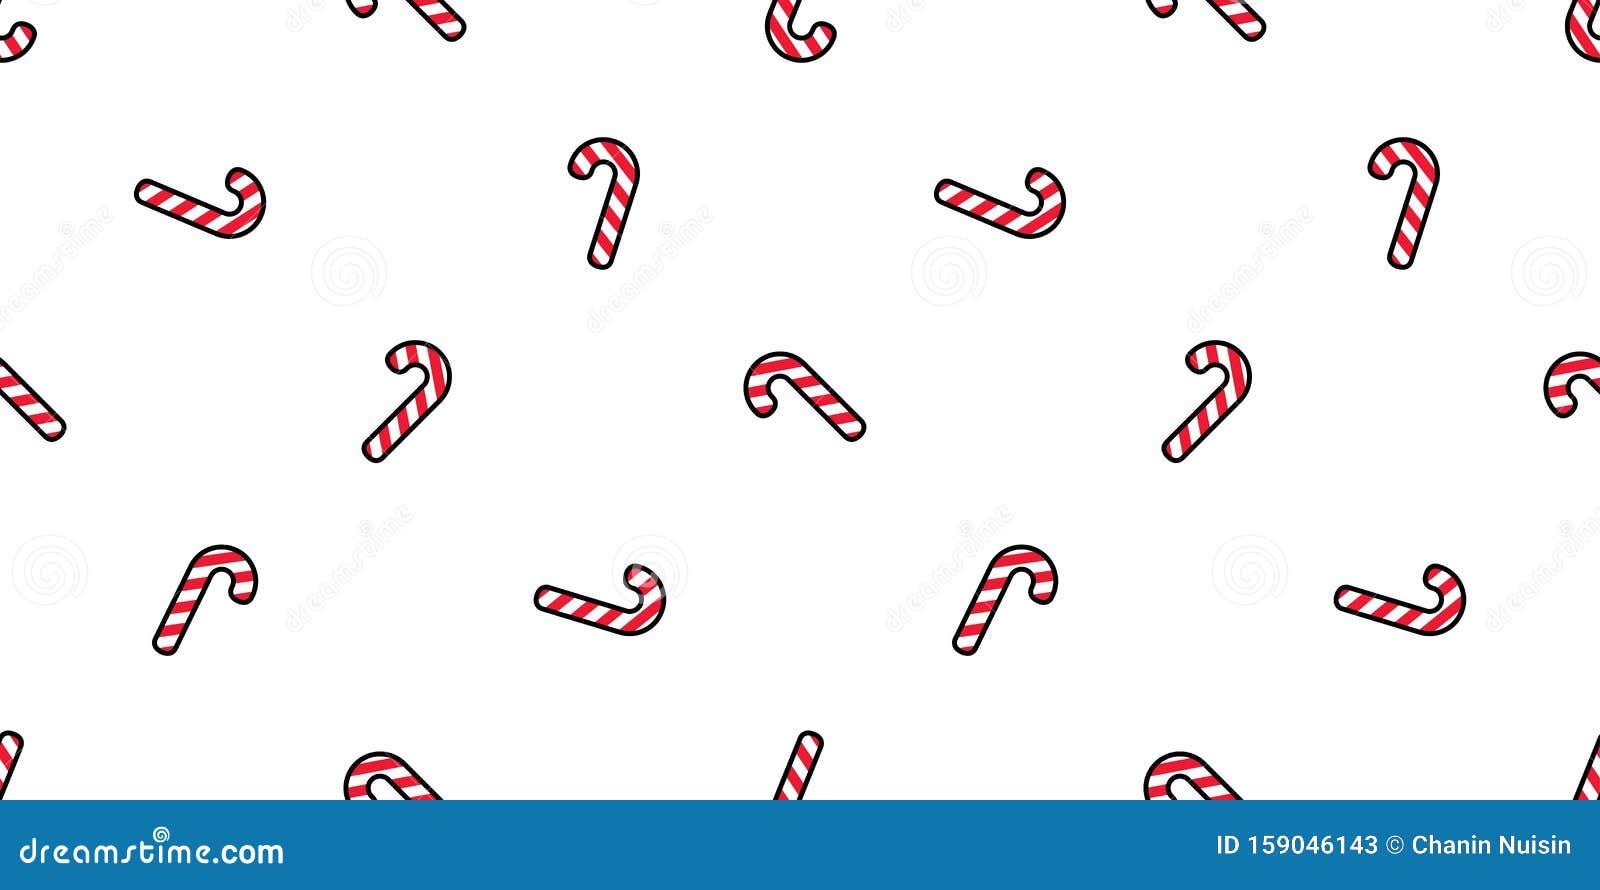 Candy Cane Seamless Pattern Christmas Vector Santa Claus Scarf Isolated  Cartoon Repeat Background Tile Wallpaper Illustration Gift Stock  Illustration - Illustration of pattern, cartoon: 159046143